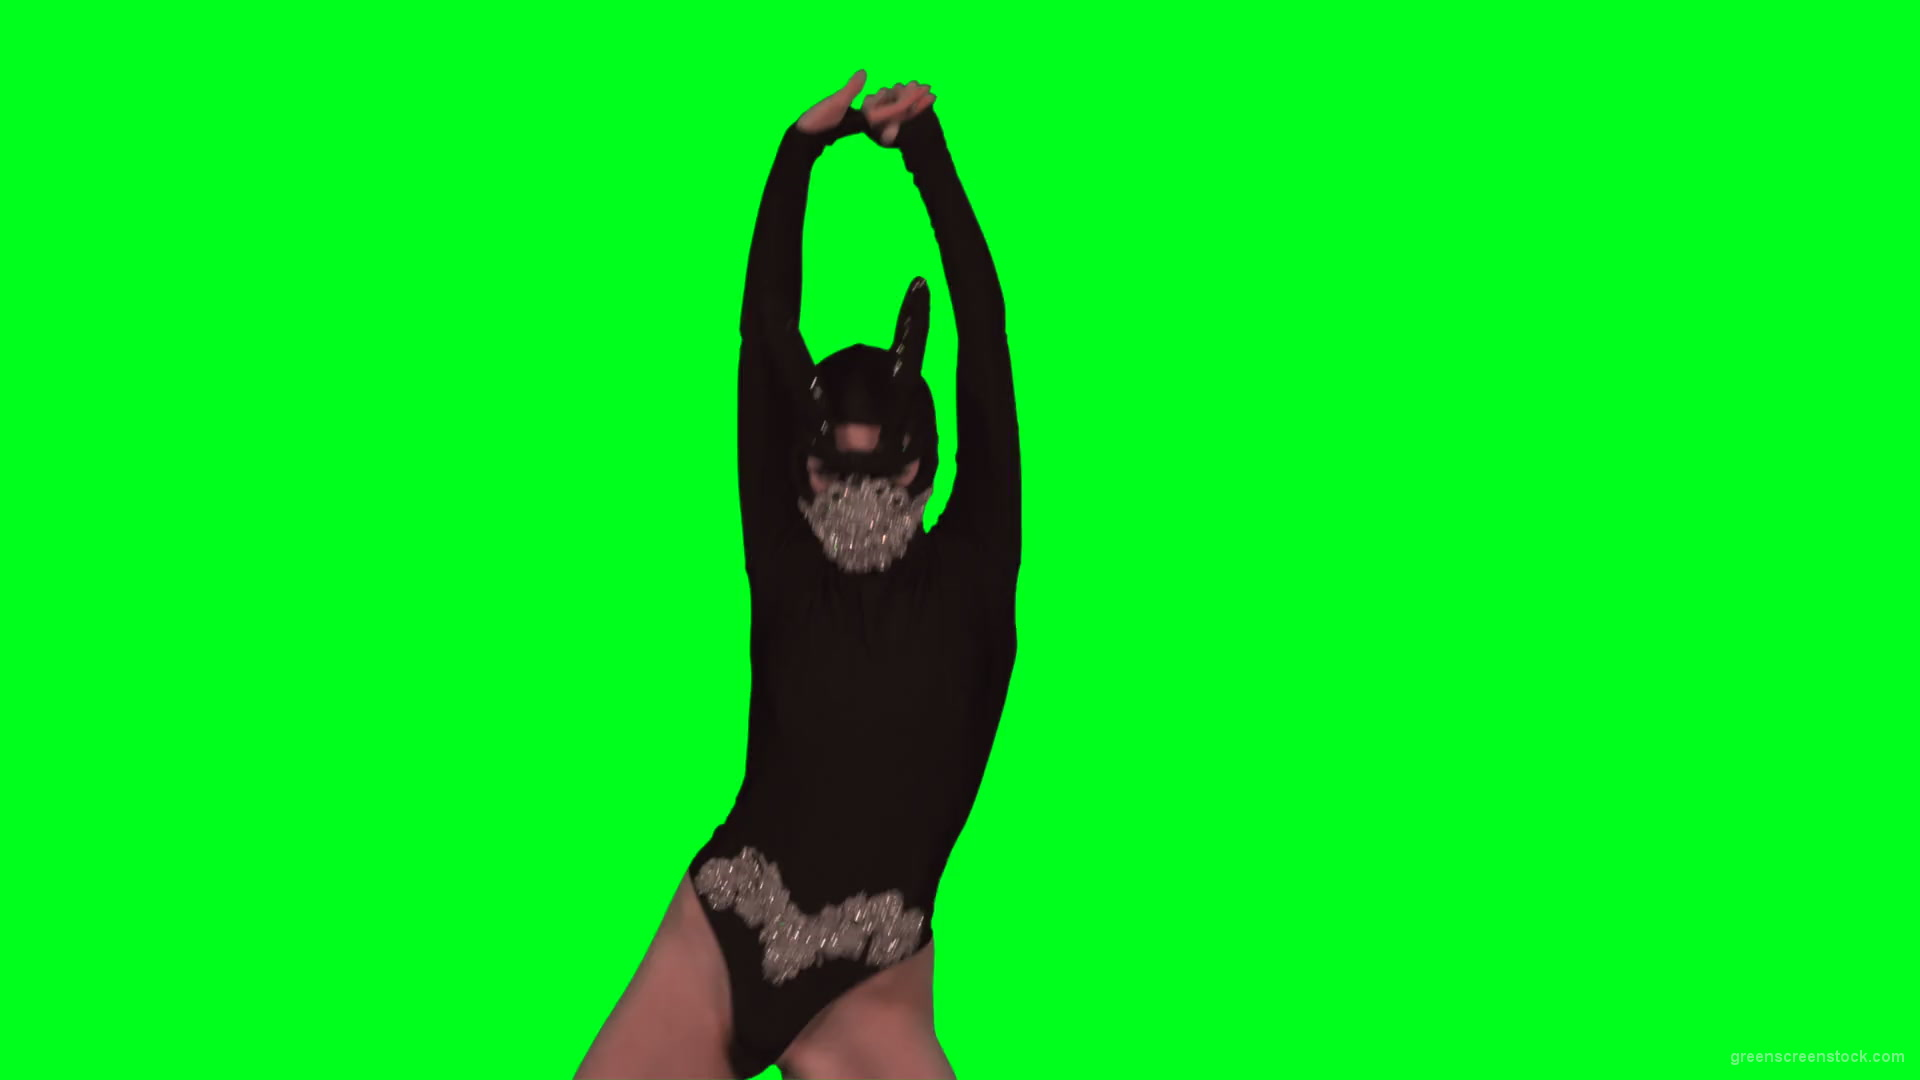 Rave-Calling-EDM-Go-Go-Dancing-Girl-performs-on-green-screen-4K-Video-Footage-1920_001 Green Screen Stock